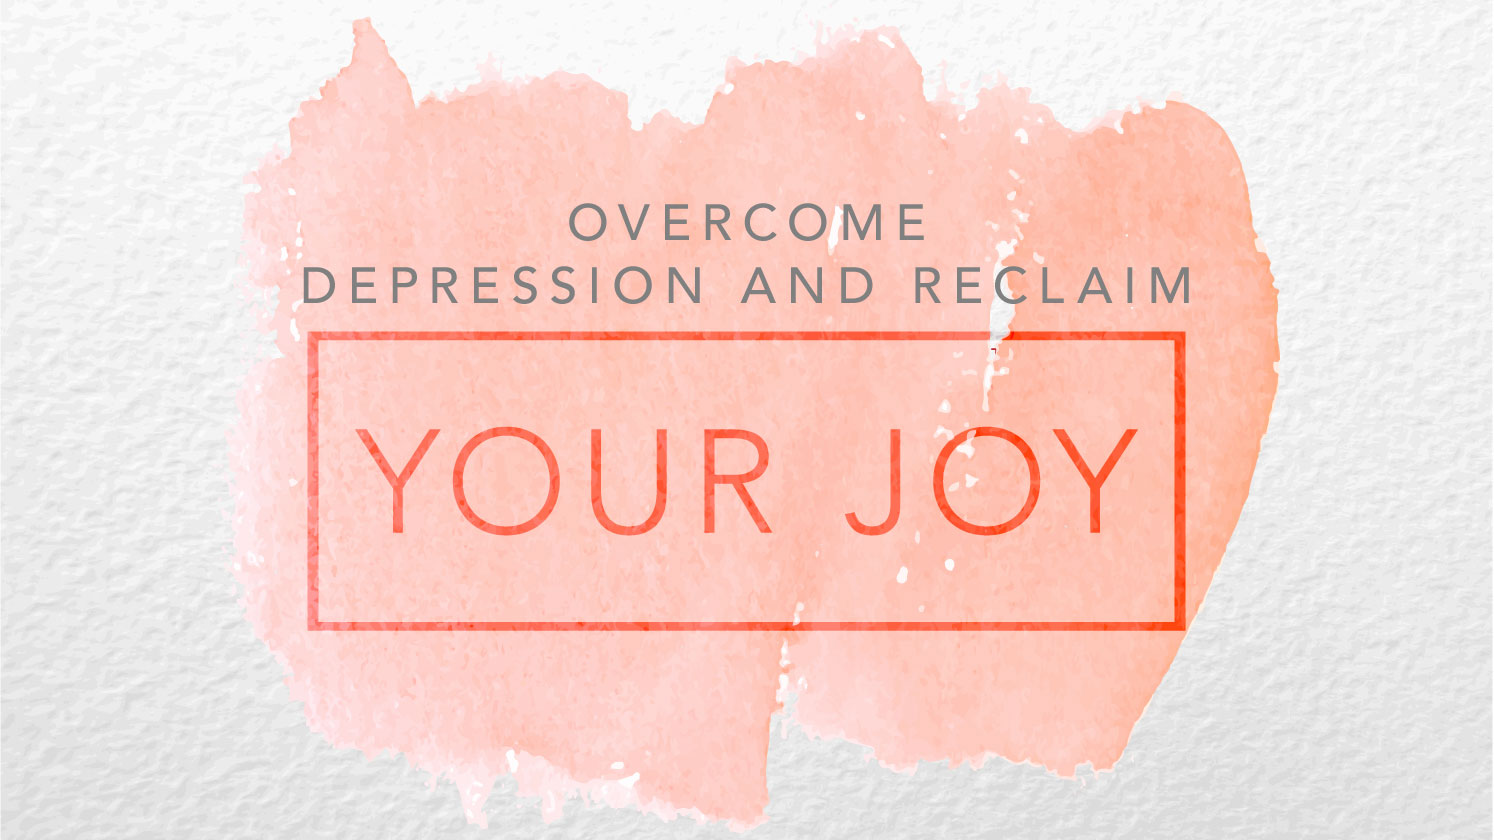 Overcome Depression and Reclaim Your Joy